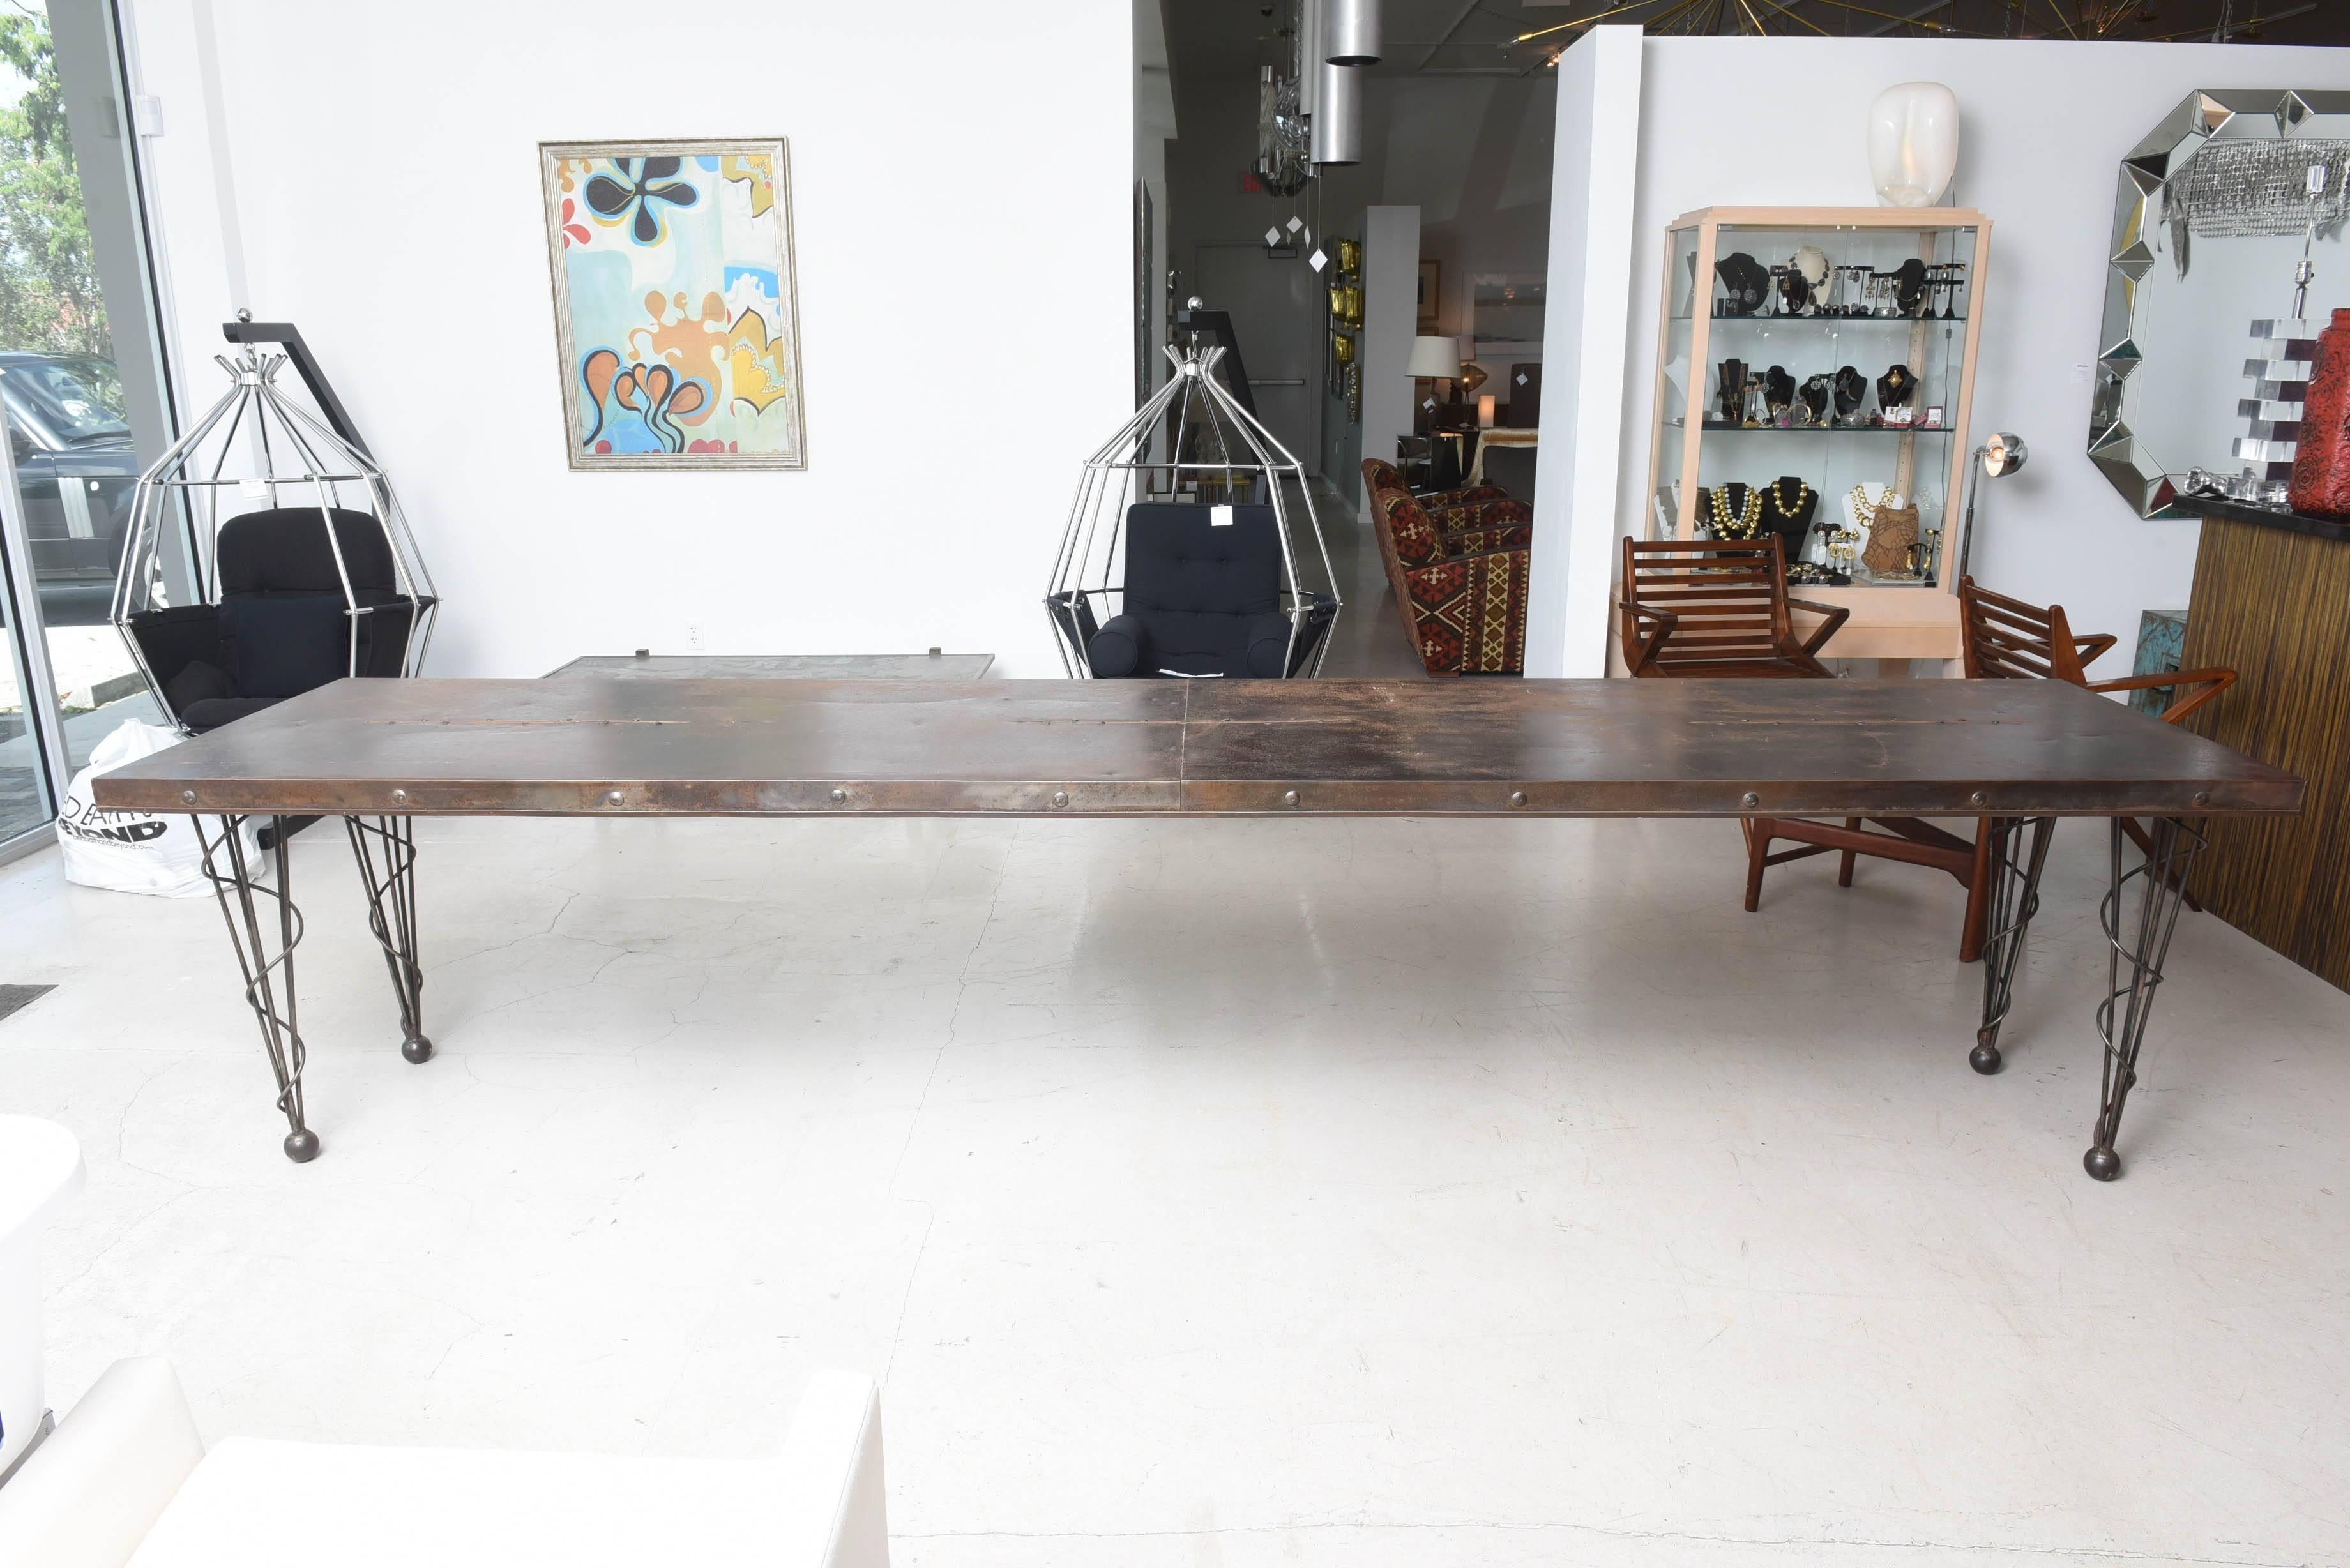 Twelve foot long factory table with whimsical conical legs. 